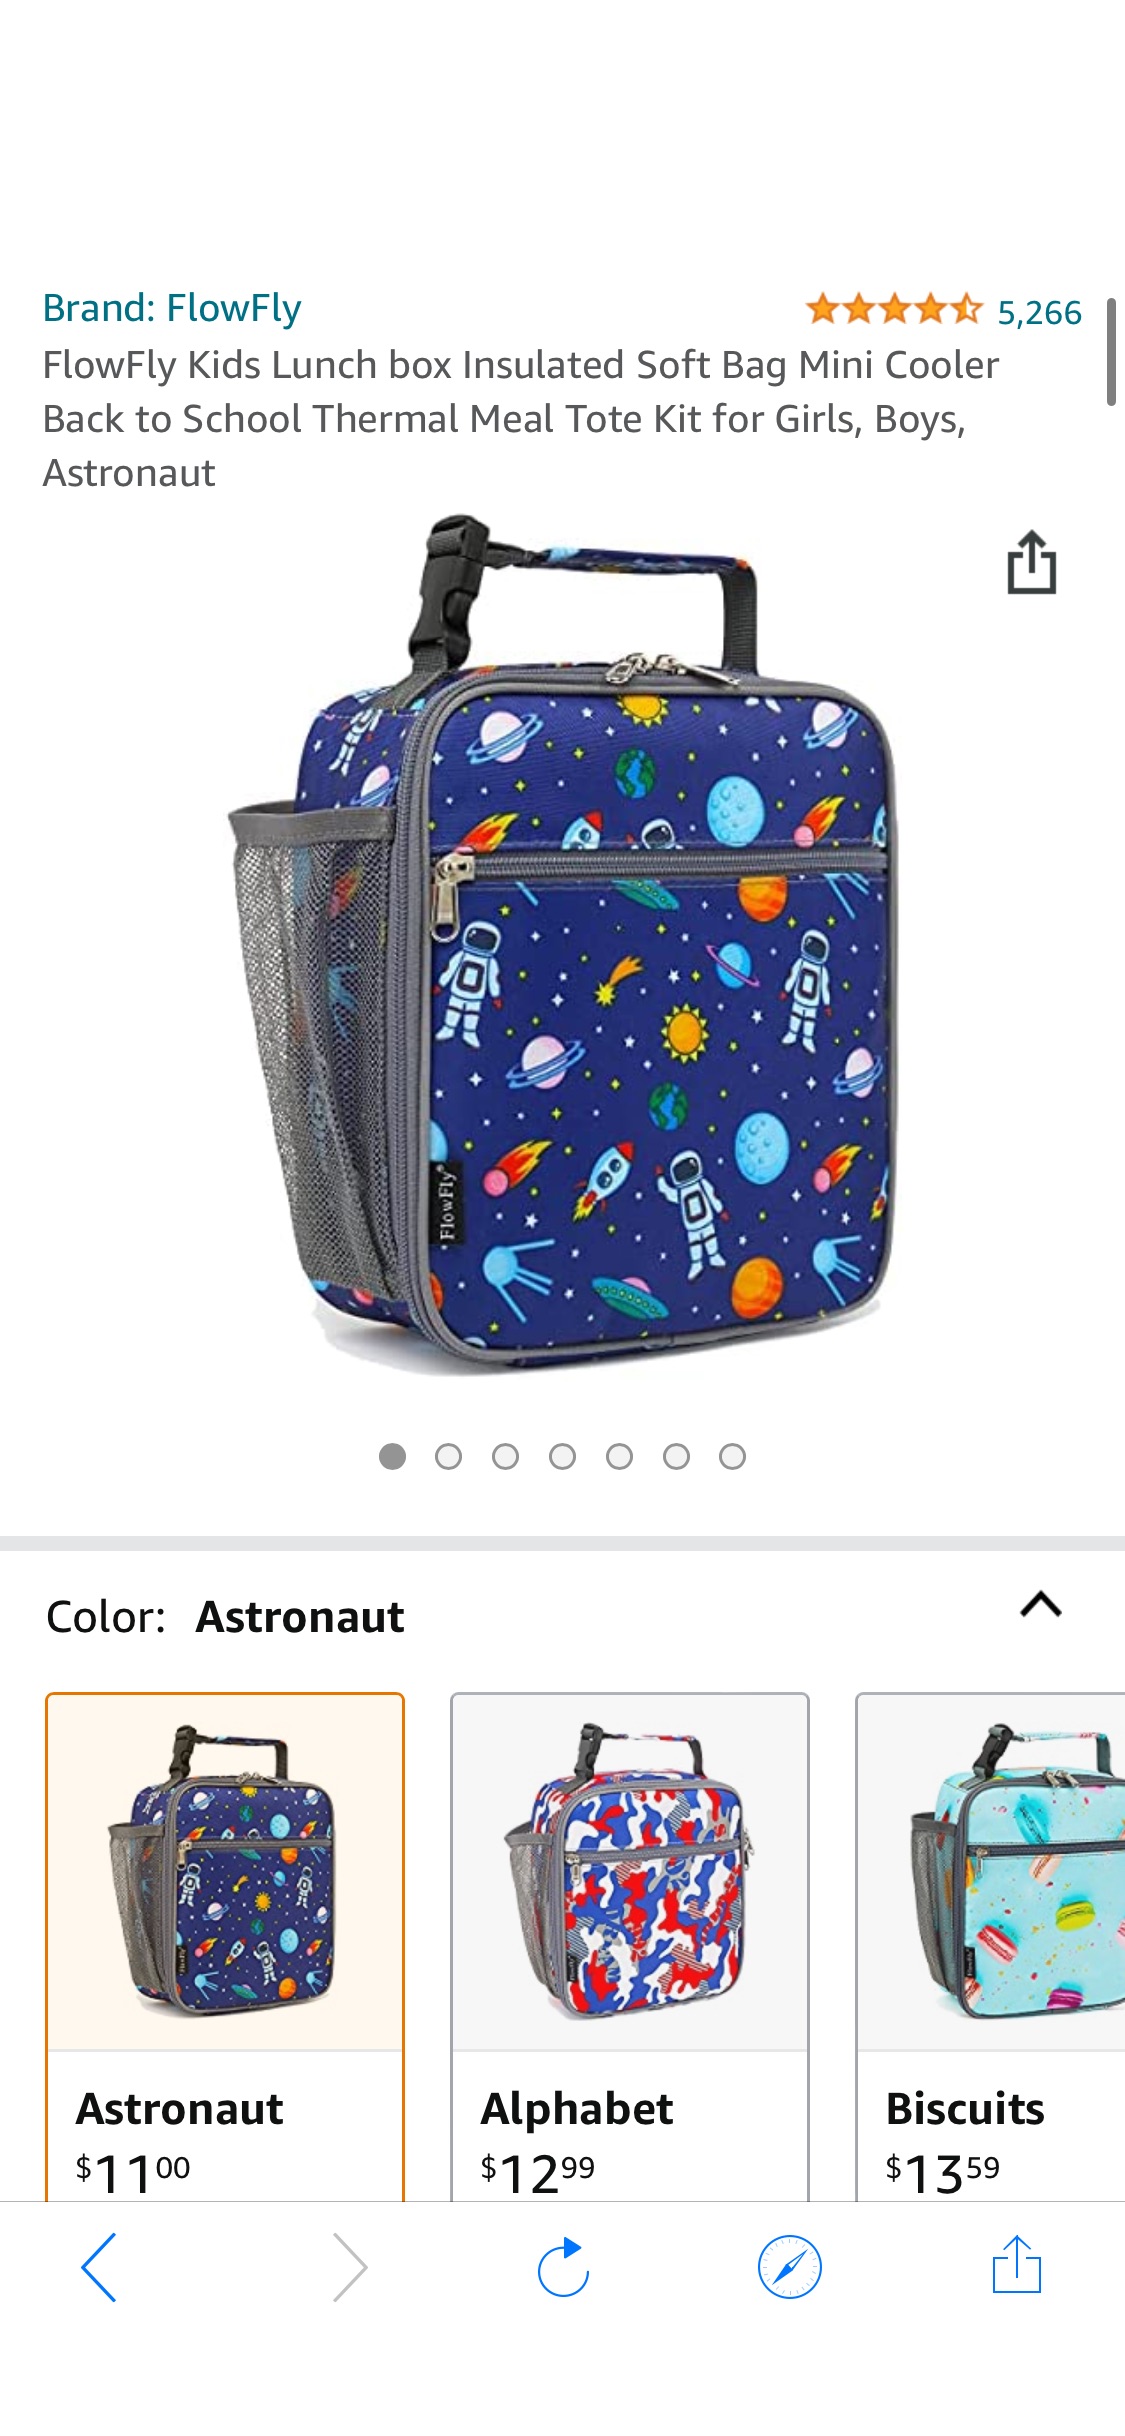 Amazon.com: FlowFly Kids Lunch box Insulated Soft Bag Mini Cooler Back to School Thermal Meal Tote Kit for Girls, Boys, Astronaut:儿童午餐袋